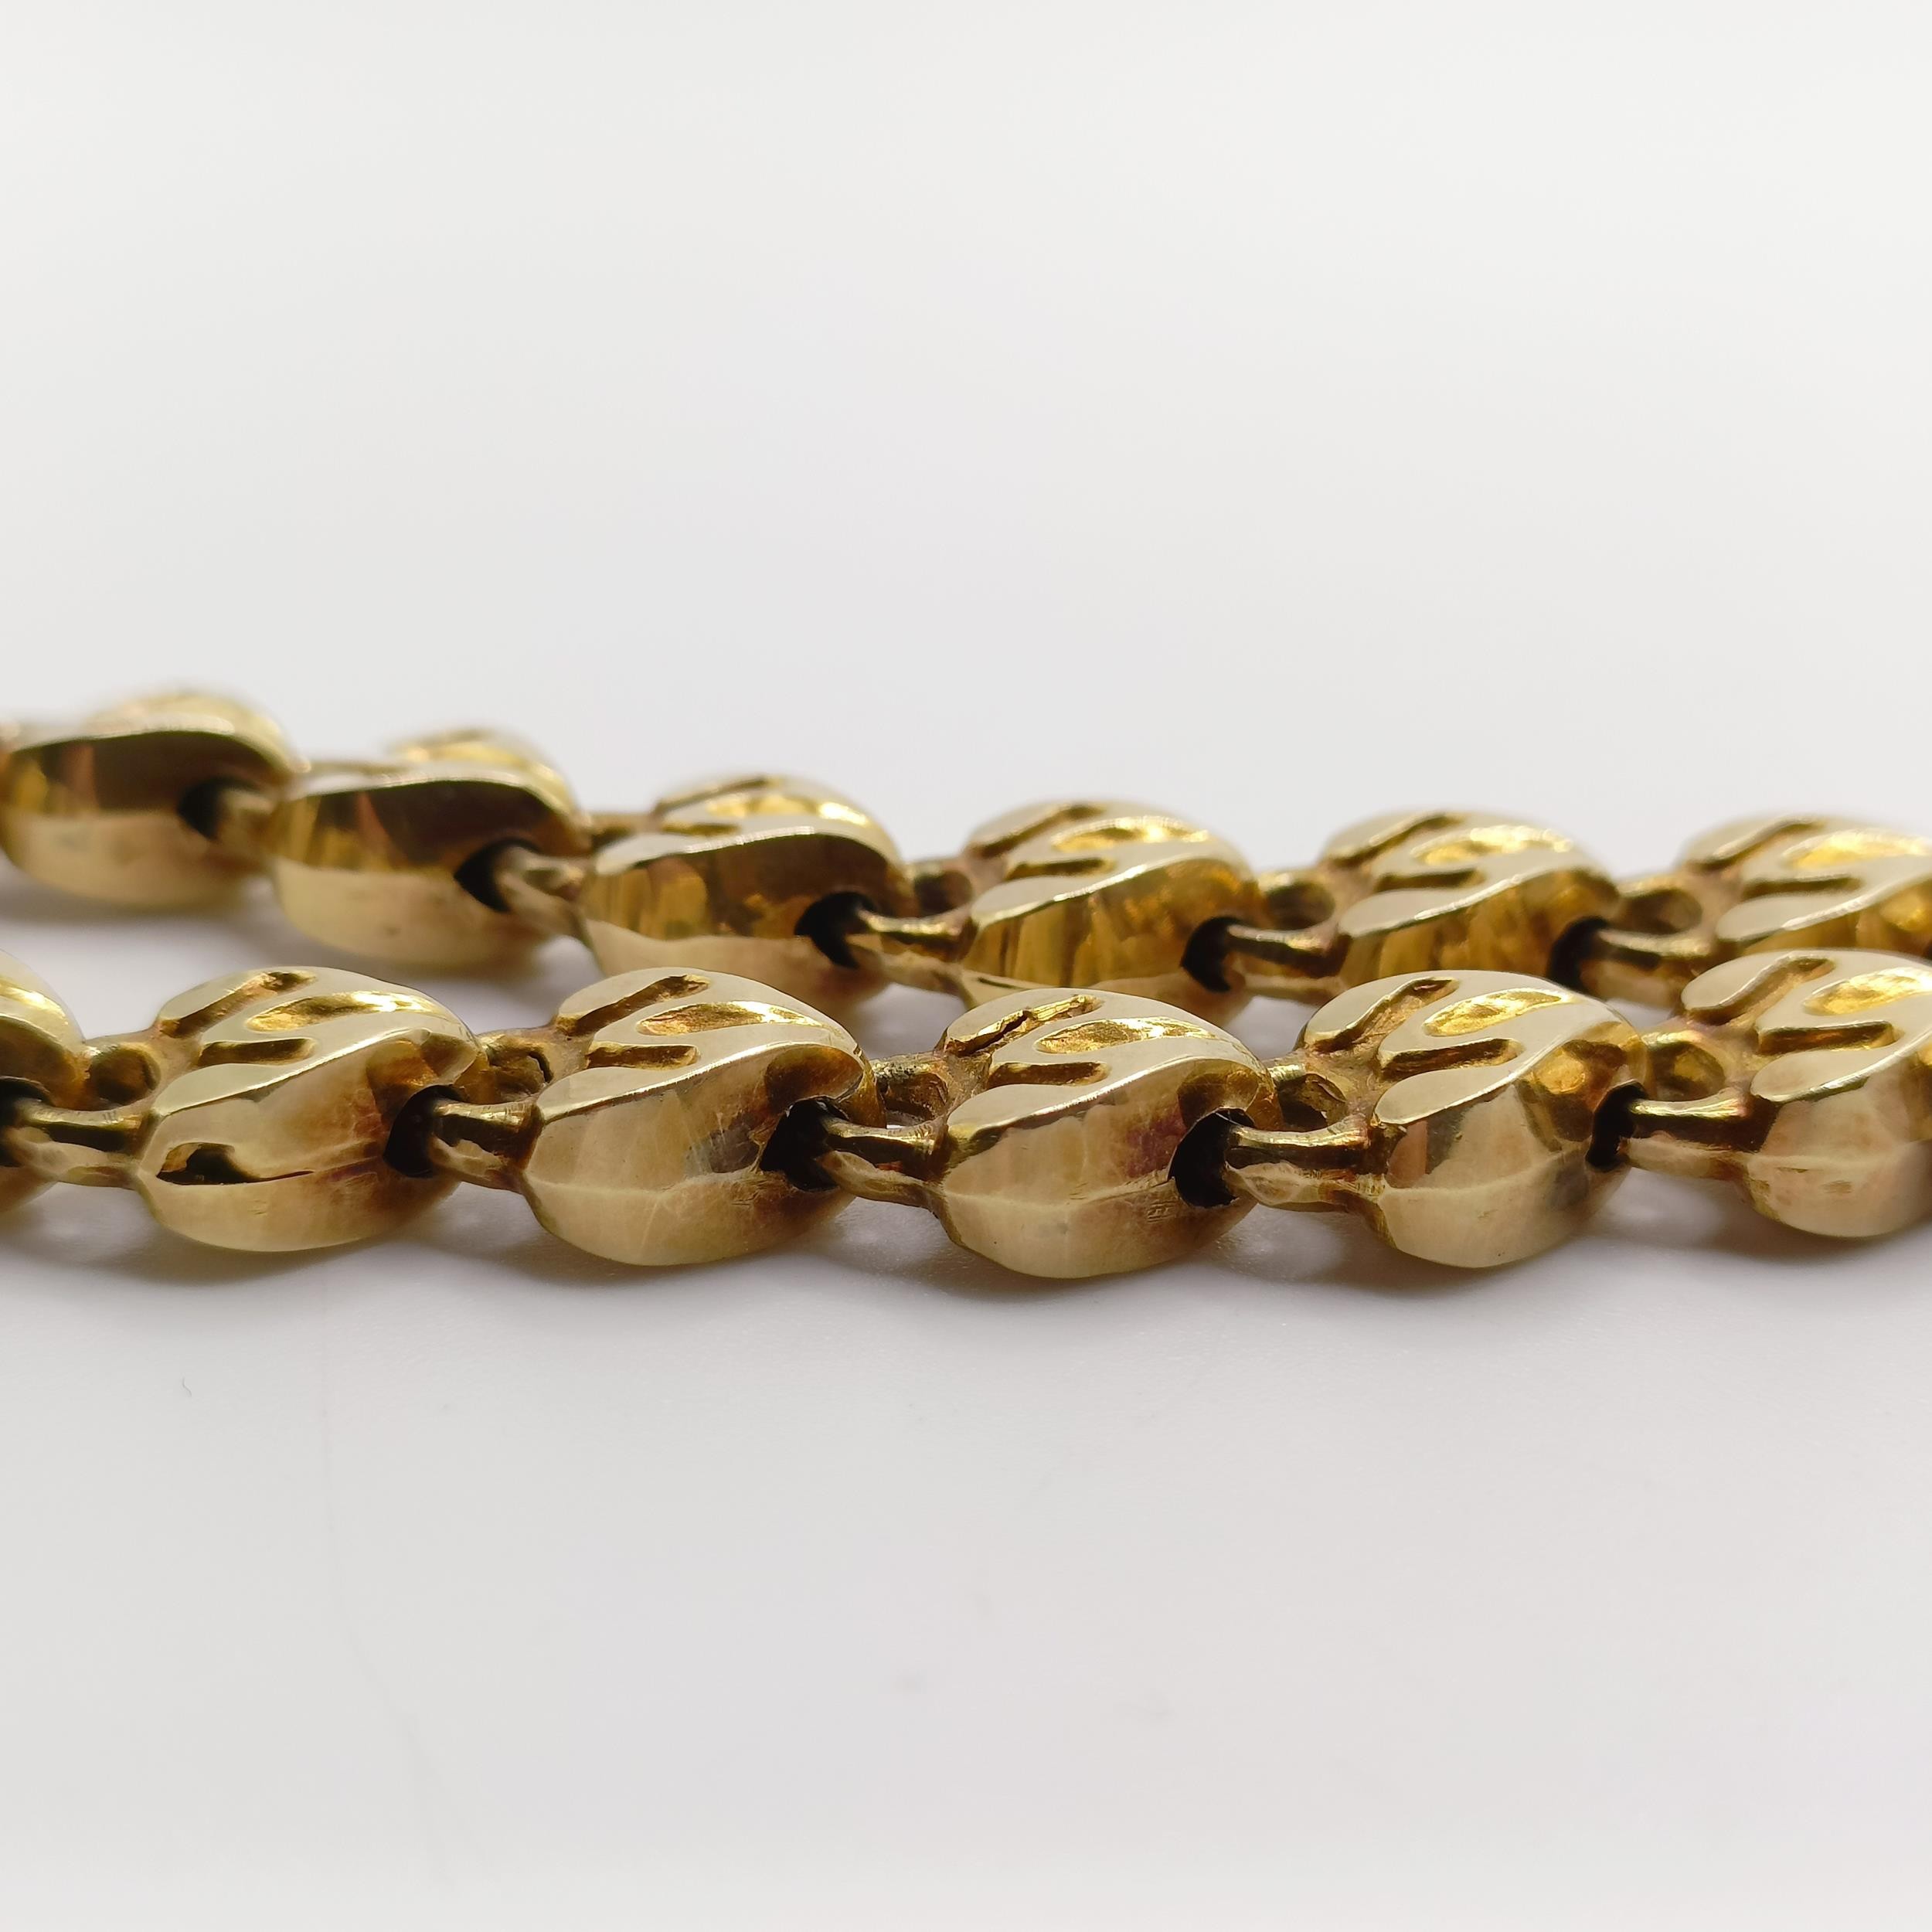 A late 19th/early 20th century yellow metal bracelet, with a padlock clasp, inset with a cabochon - Image 6 of 7